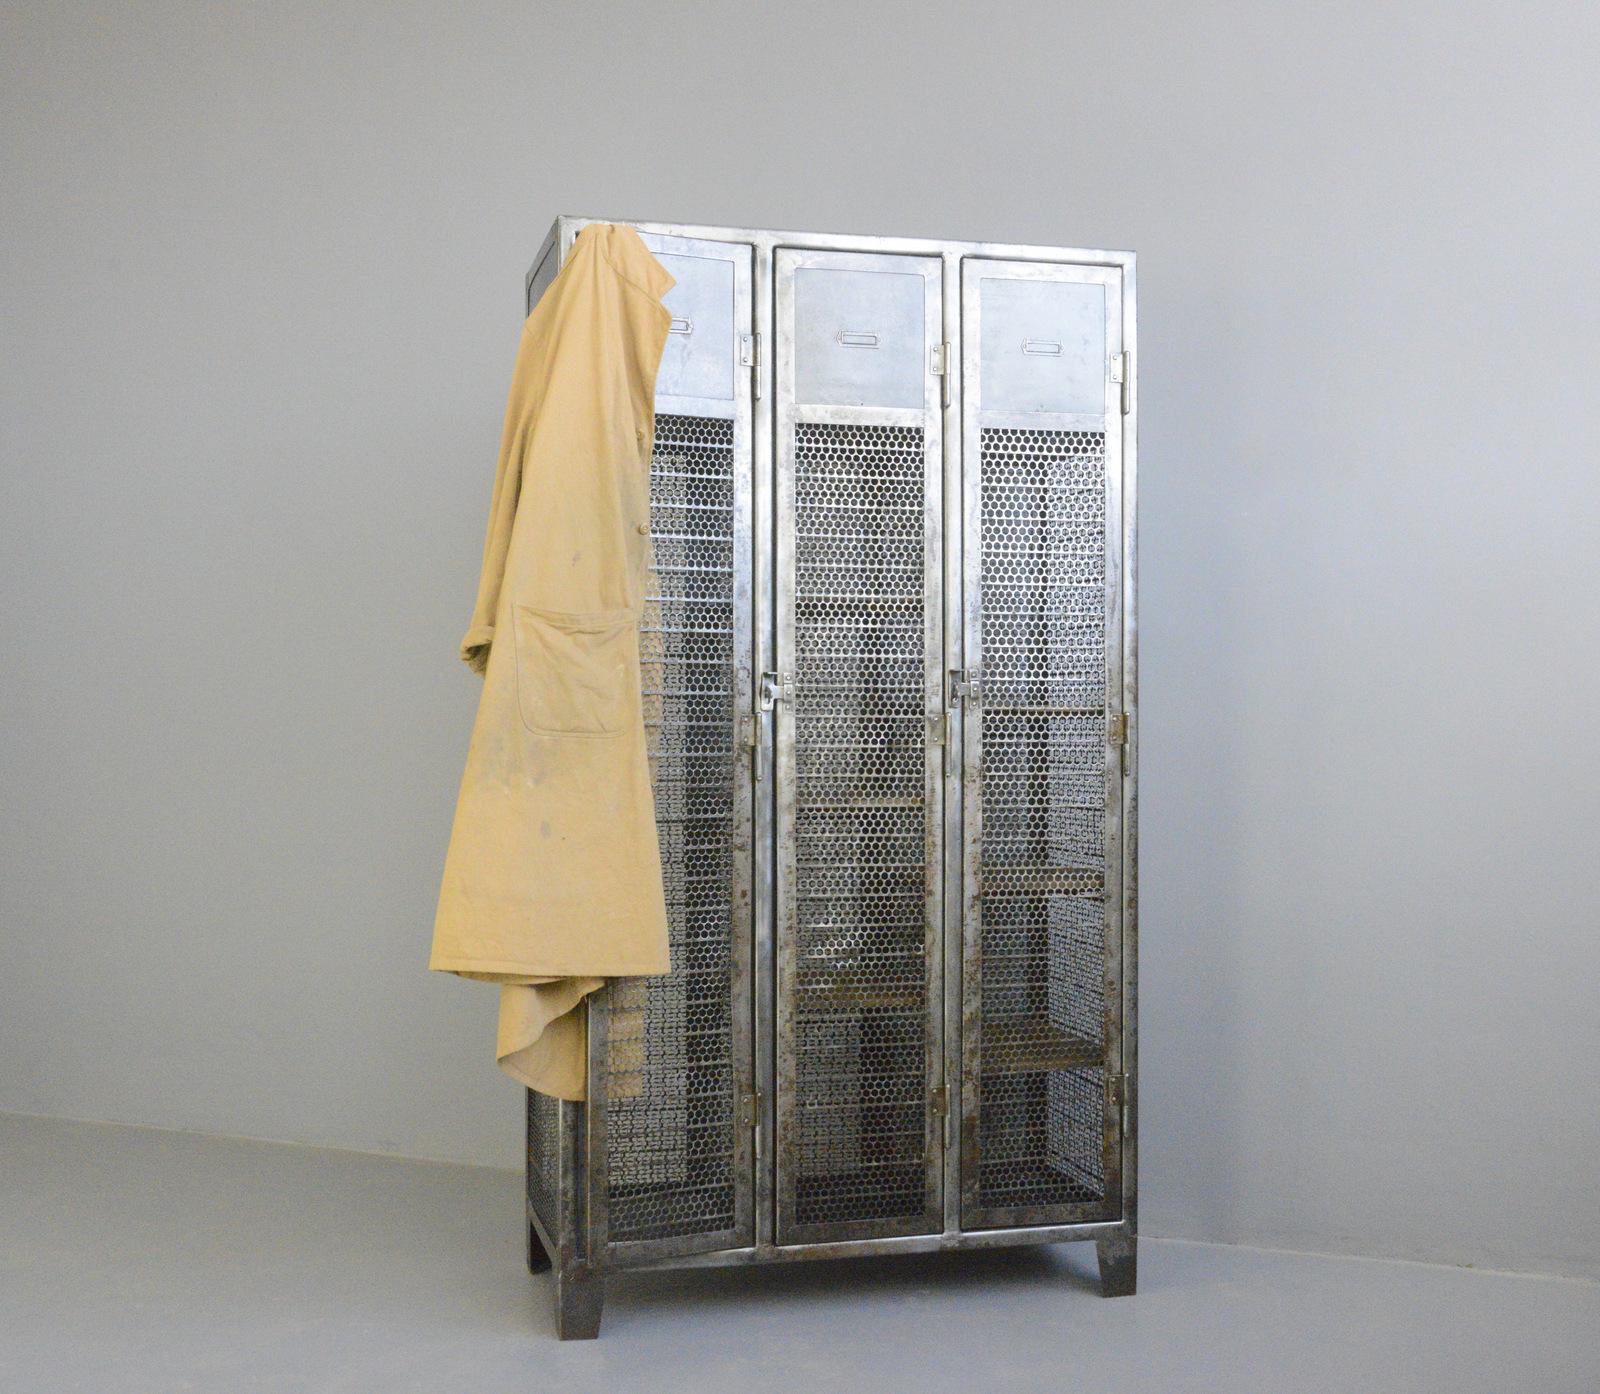 - Pressed steel mesh doors
- Original label holders
- Hanging space and shelves
- German ~ 1930s
- 100cm wide x 45cm deep x 180cm tall

Condition report

The lockers have been cleaned and clear lacquered on the outside and sprayed black on